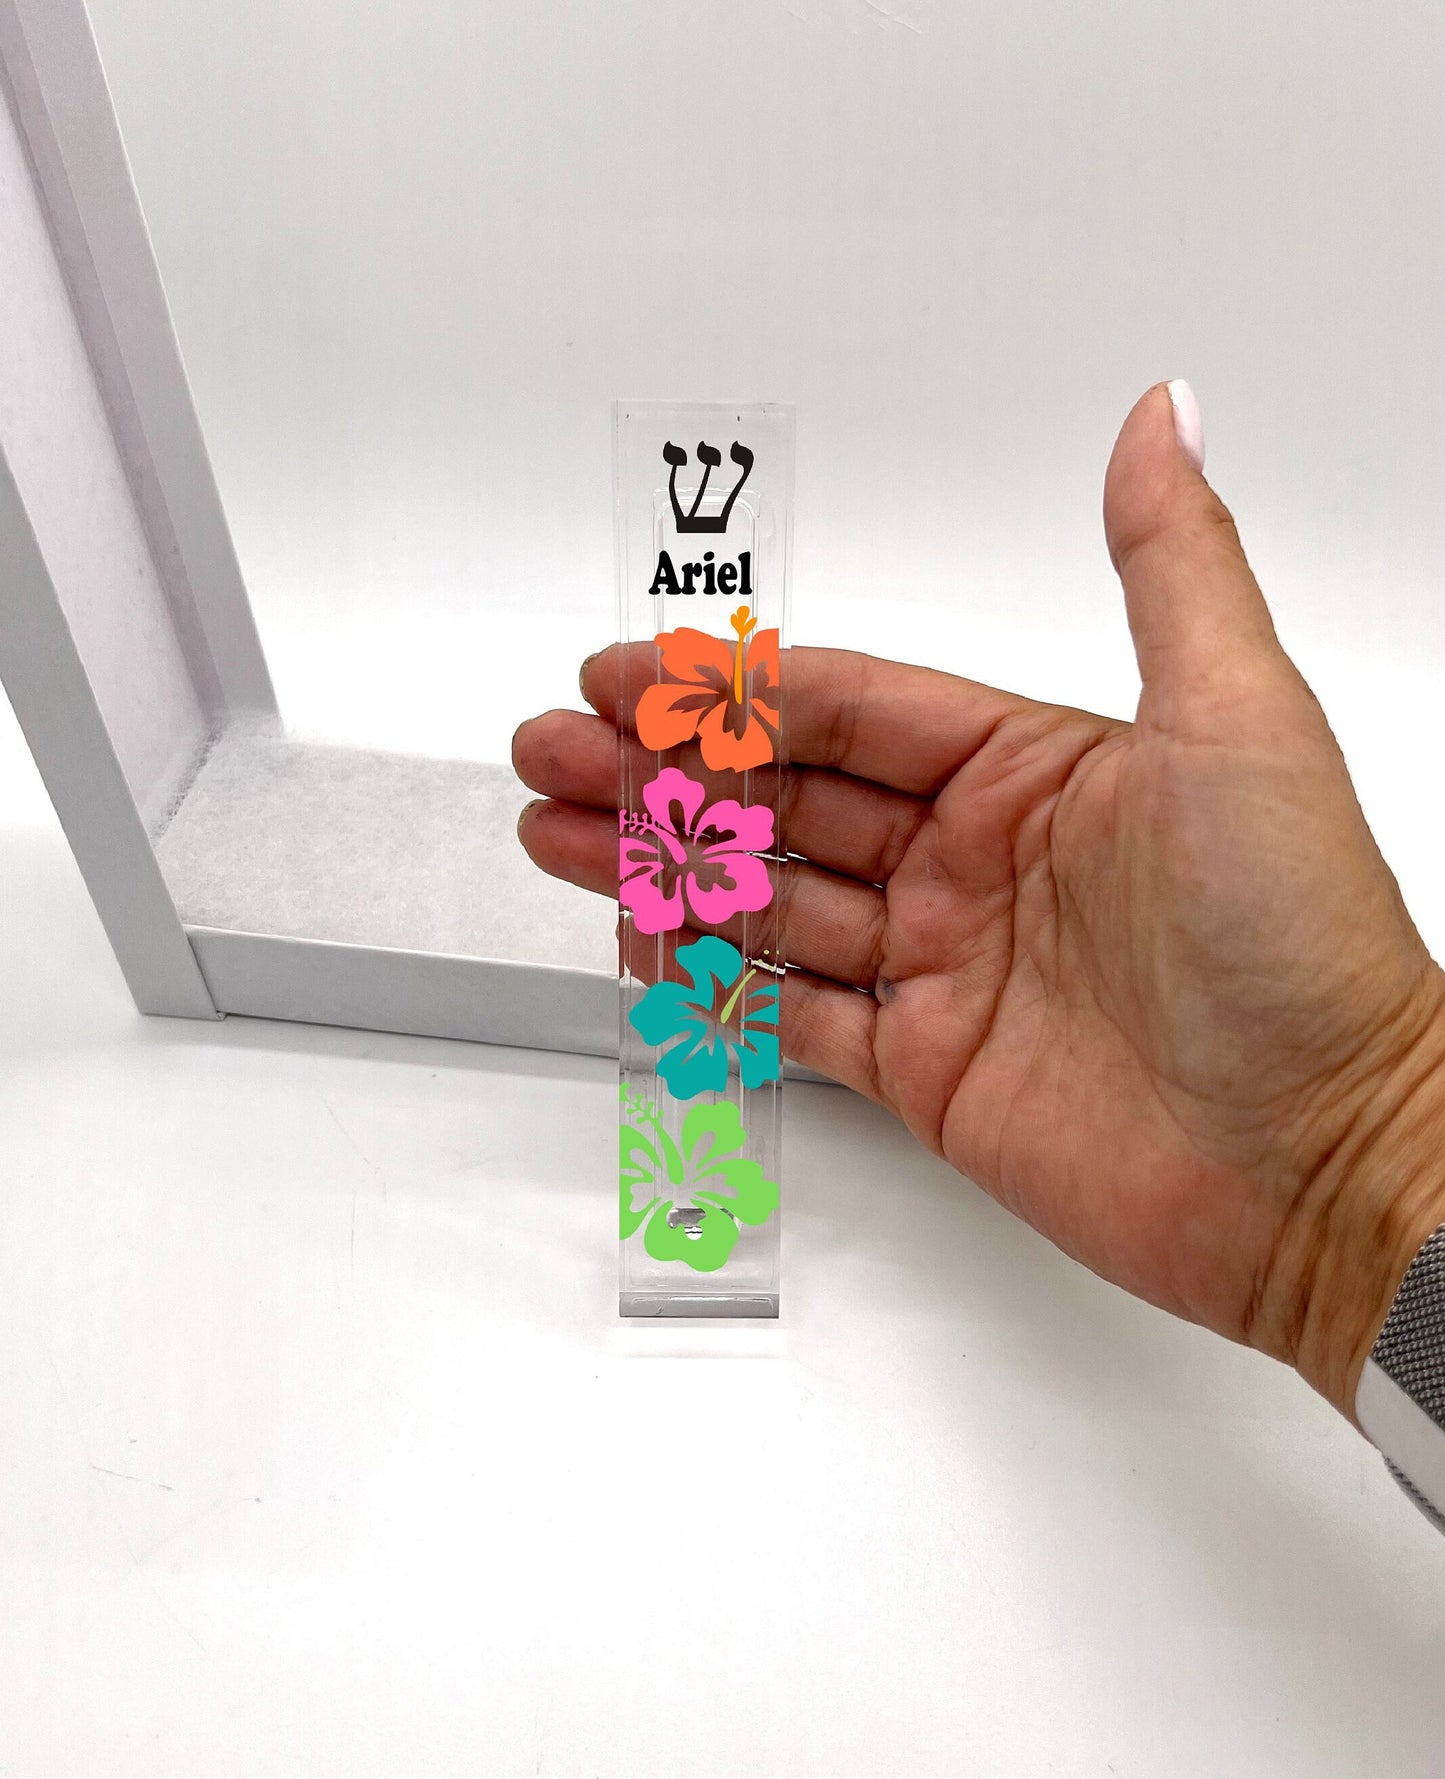 Personalized Mezuzah - With or without name - Hibiscus Flower Mezuzah - Colorful Modern Mezuzah - Custom Mezuzah  - New Home Gift